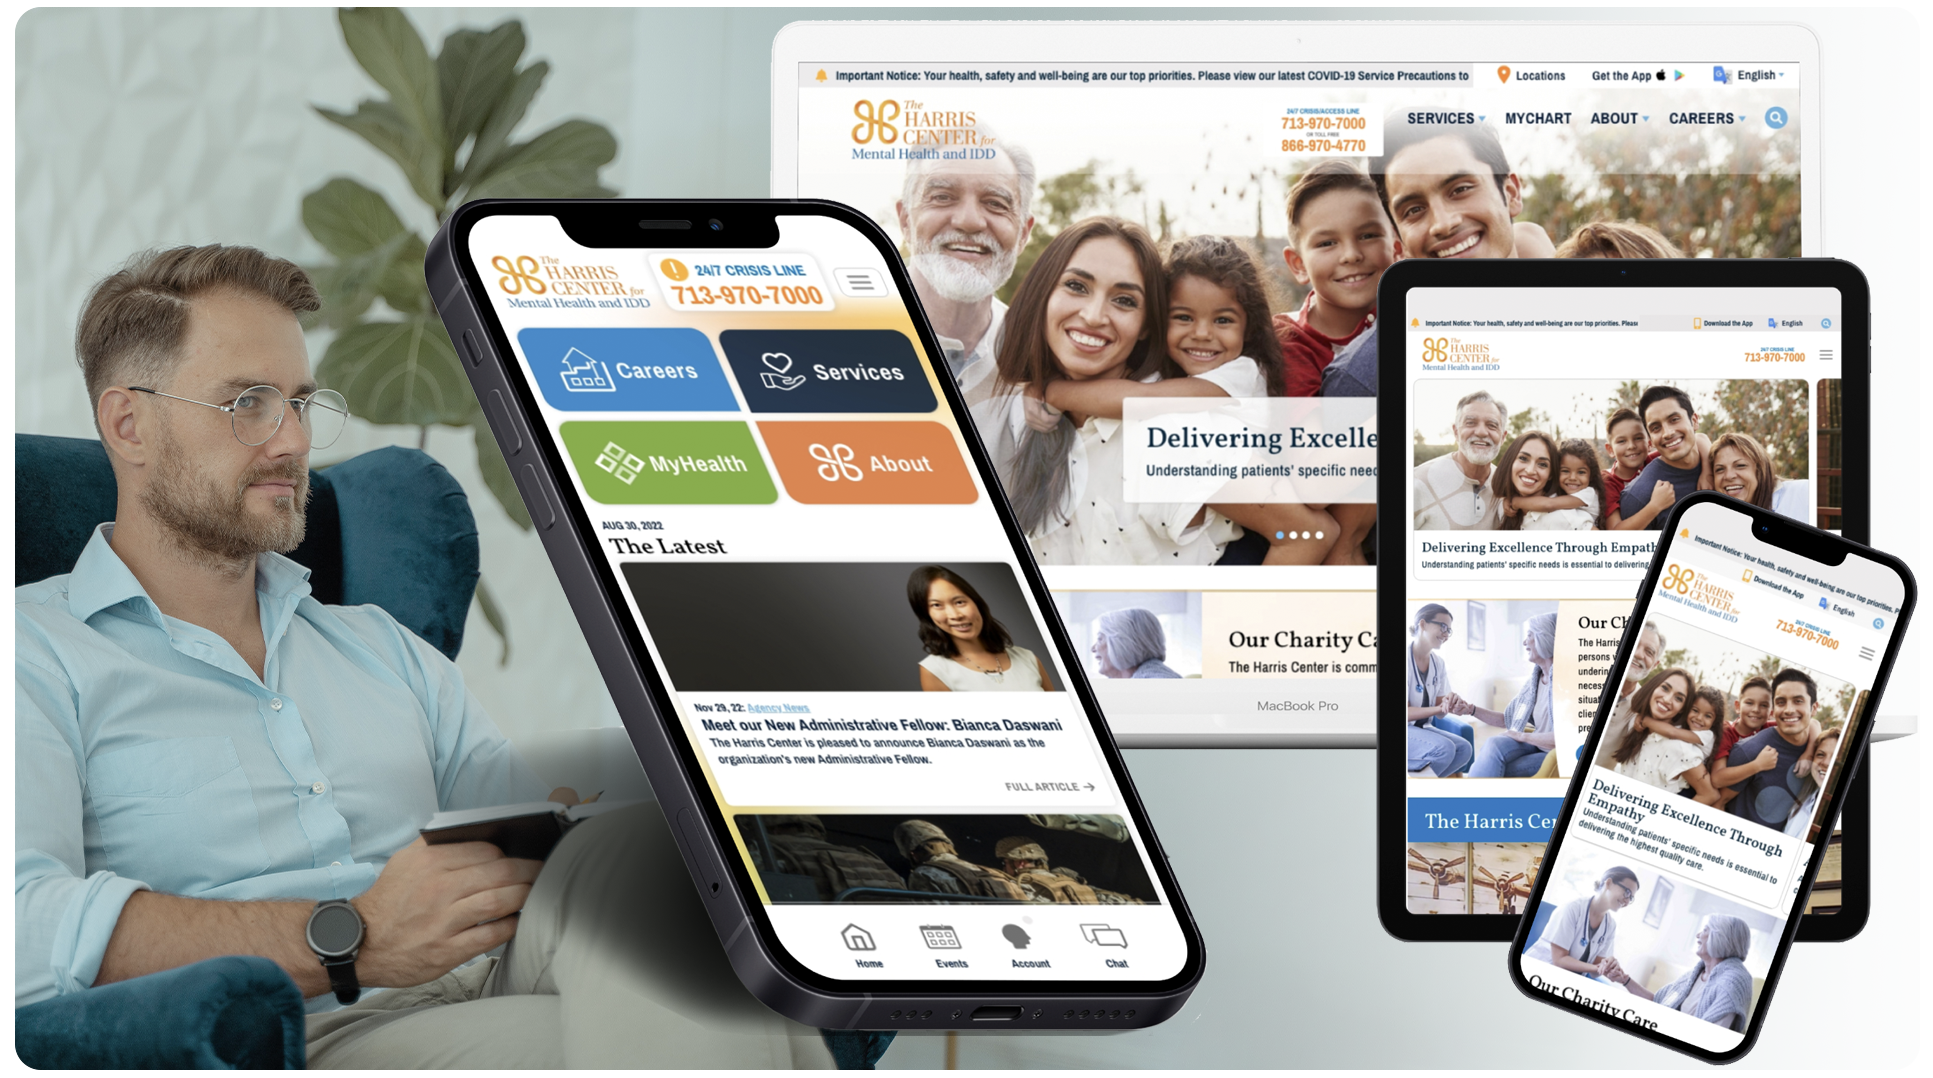 Hero Pic: The Harris Center for Mental Health and IDD: Mobile app and desktop, tablet, and mobile view of the redesigned website, all over a background suggesting a counseling setting